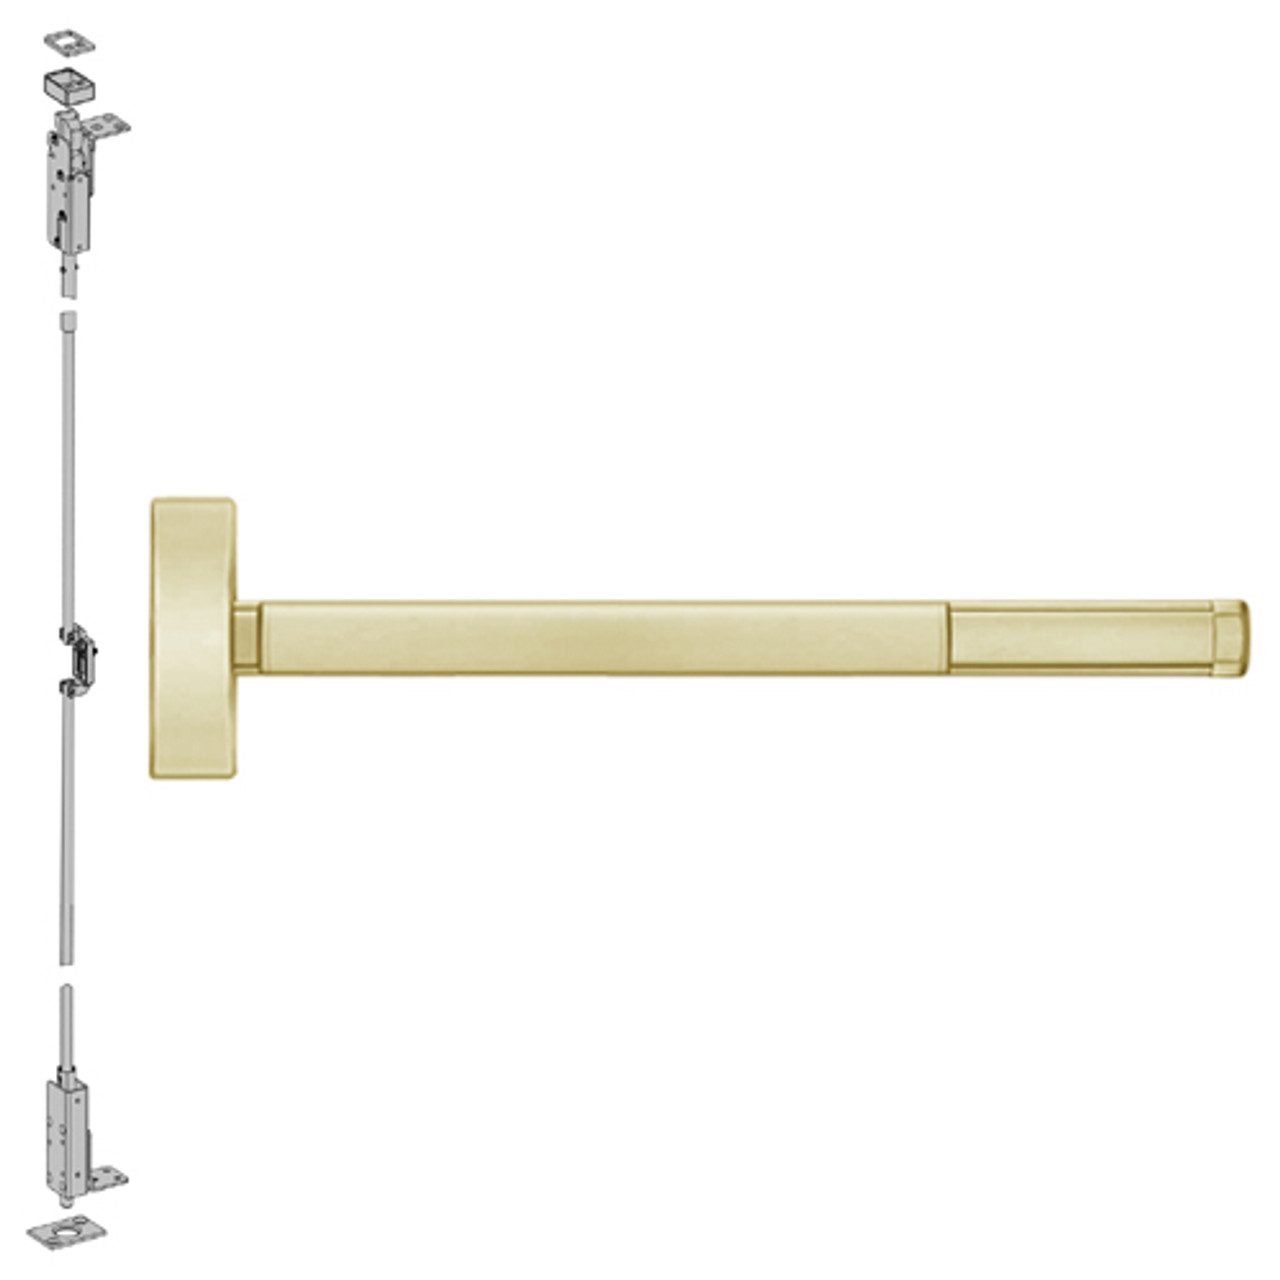 DEFL2701LBR-606-48 PHI 2700 Series Fire Rated Wood Door Concealed Vertical Exit Device with Delayed Egress Prepped for Cover Plate in Satin Brass Finish